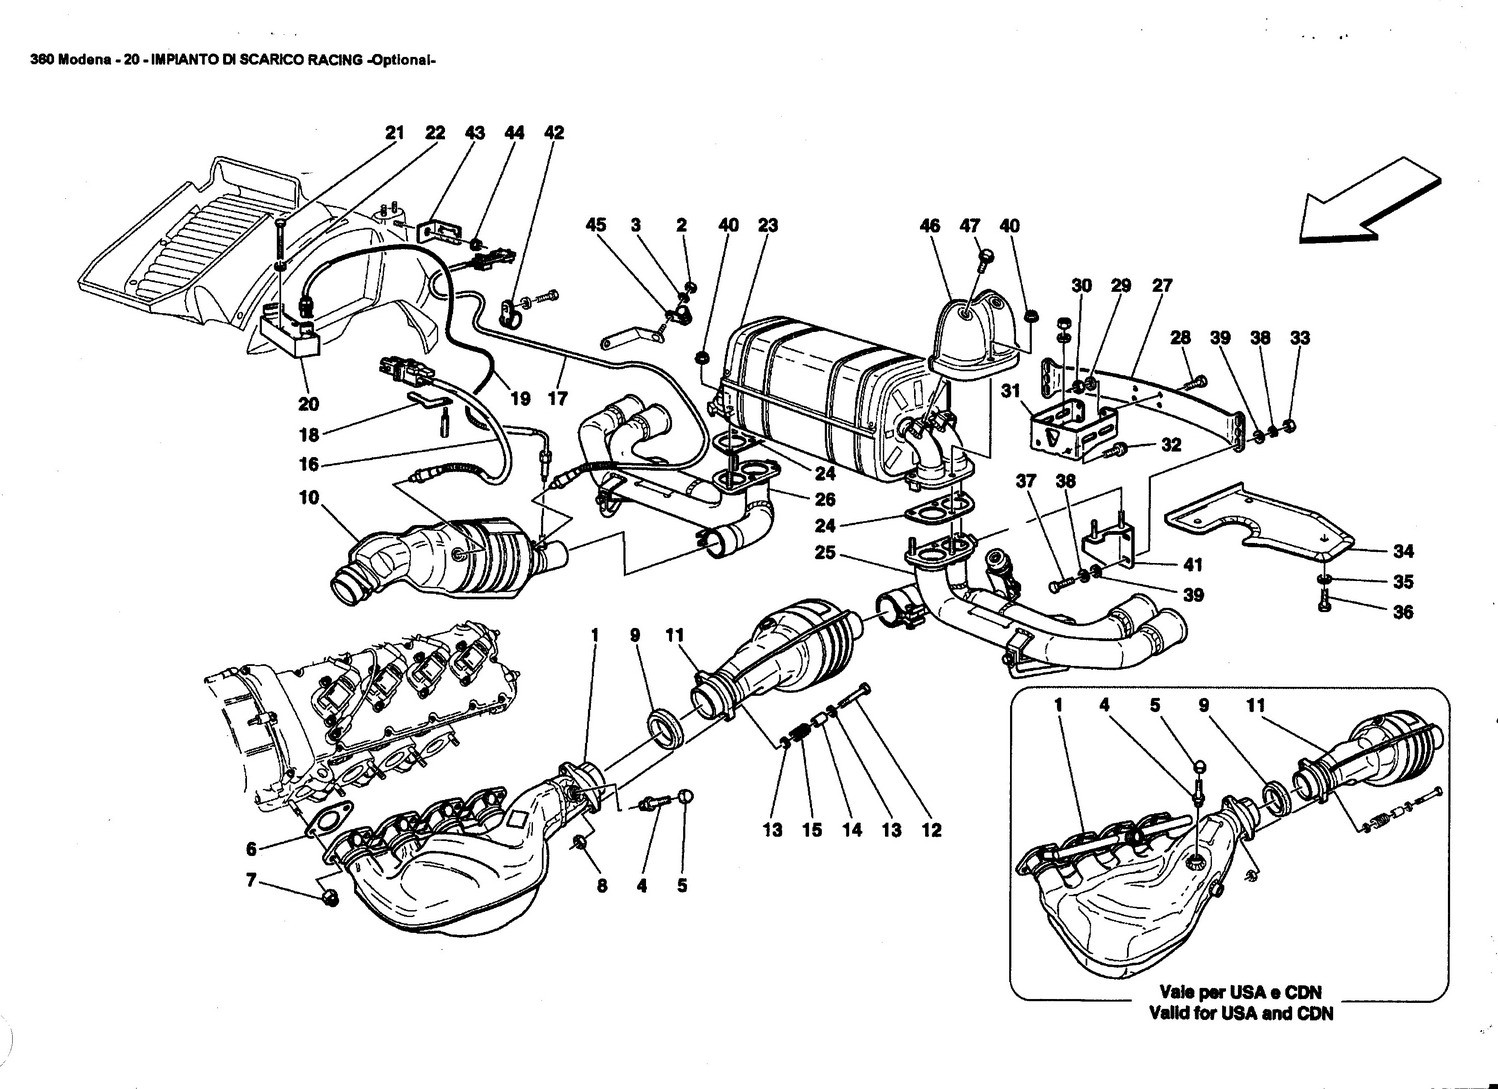 RACING EXHAUST SYSTEM -Optional-